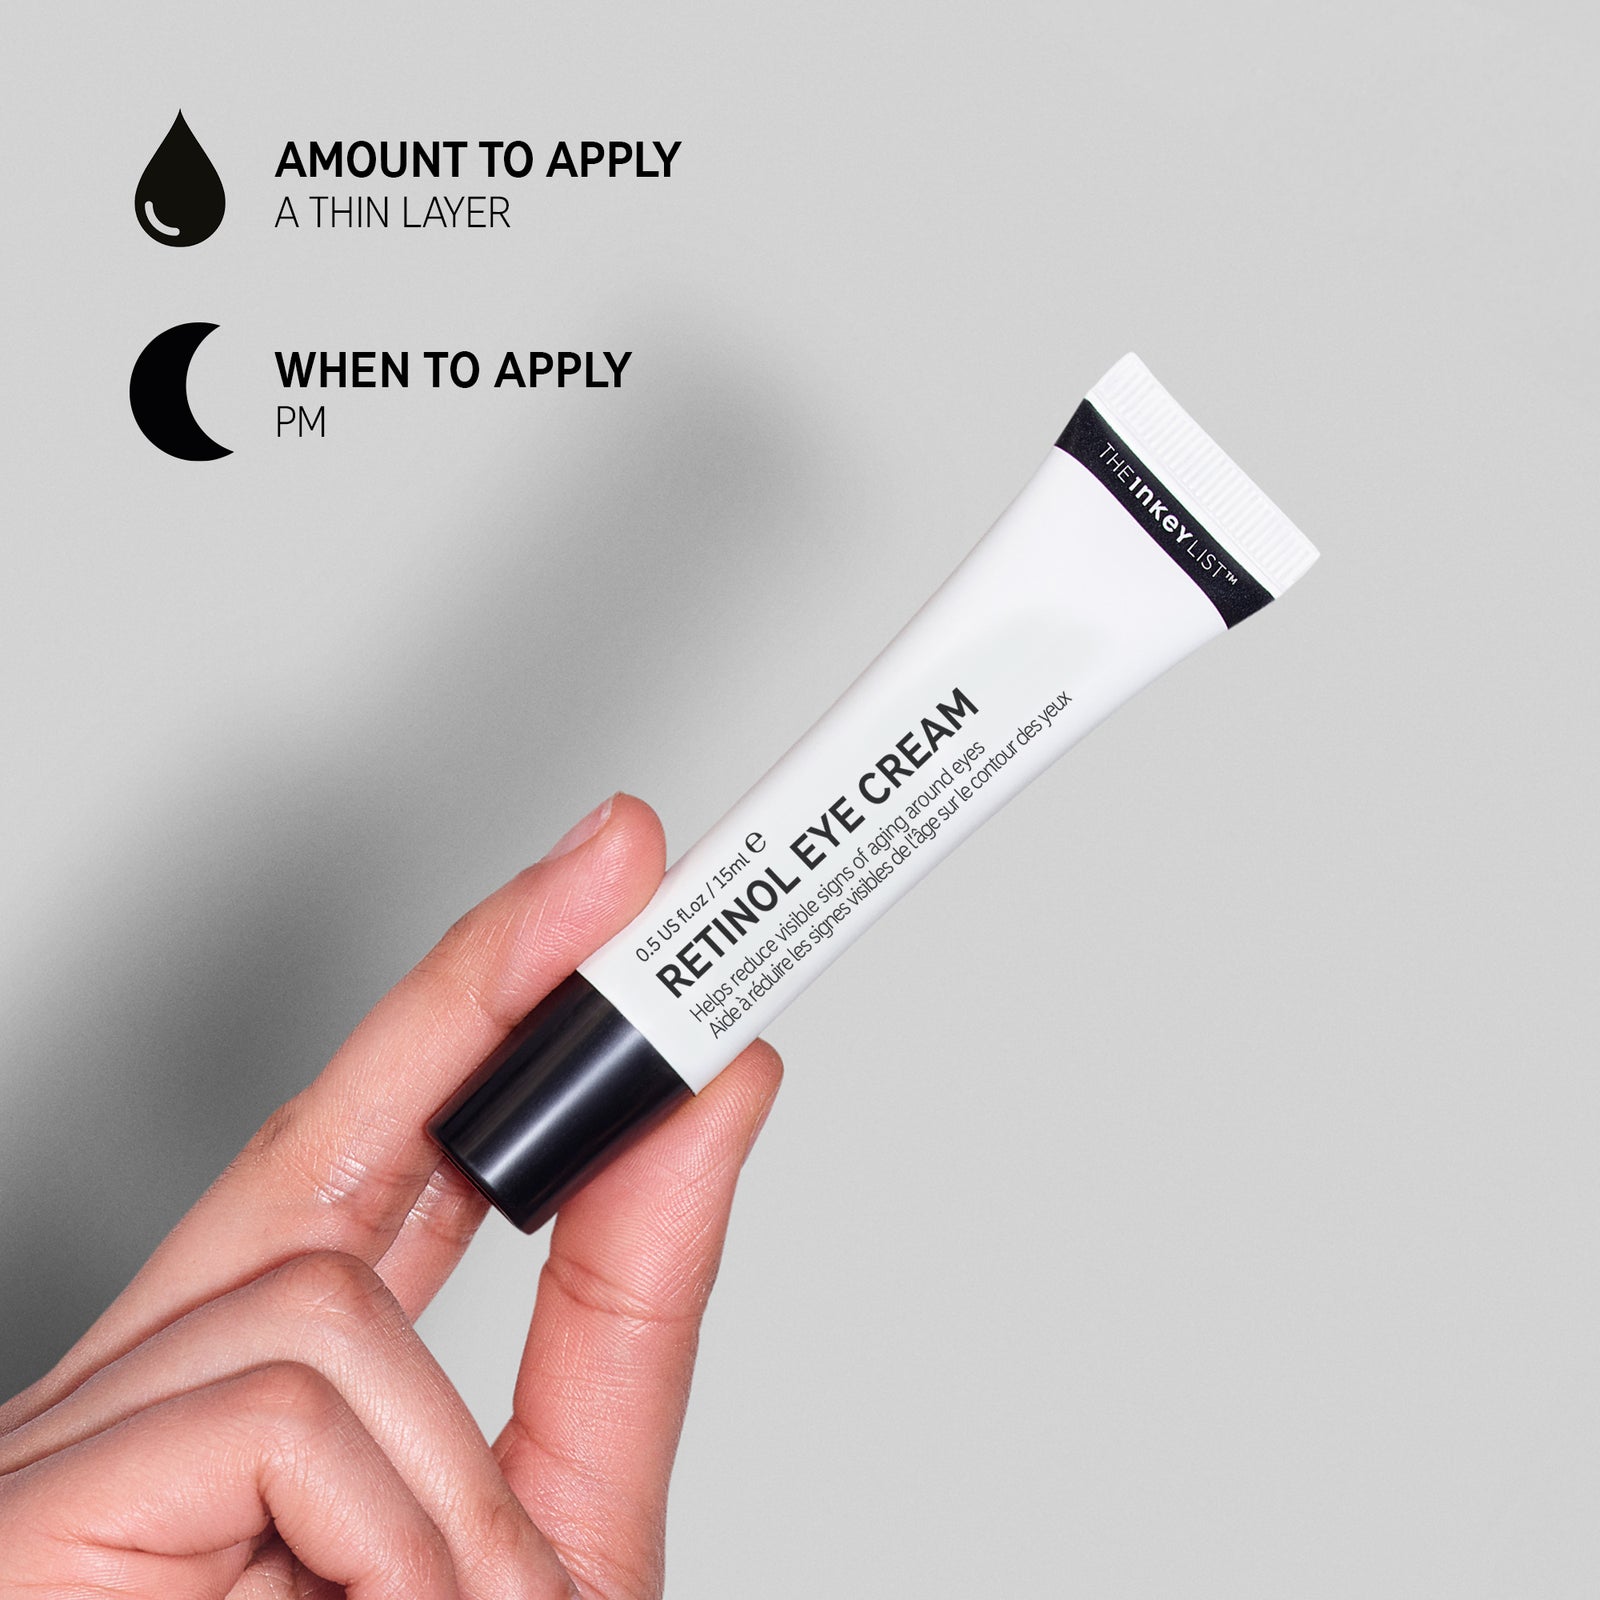 Retinol Eye Cream annotated with how and when to use it